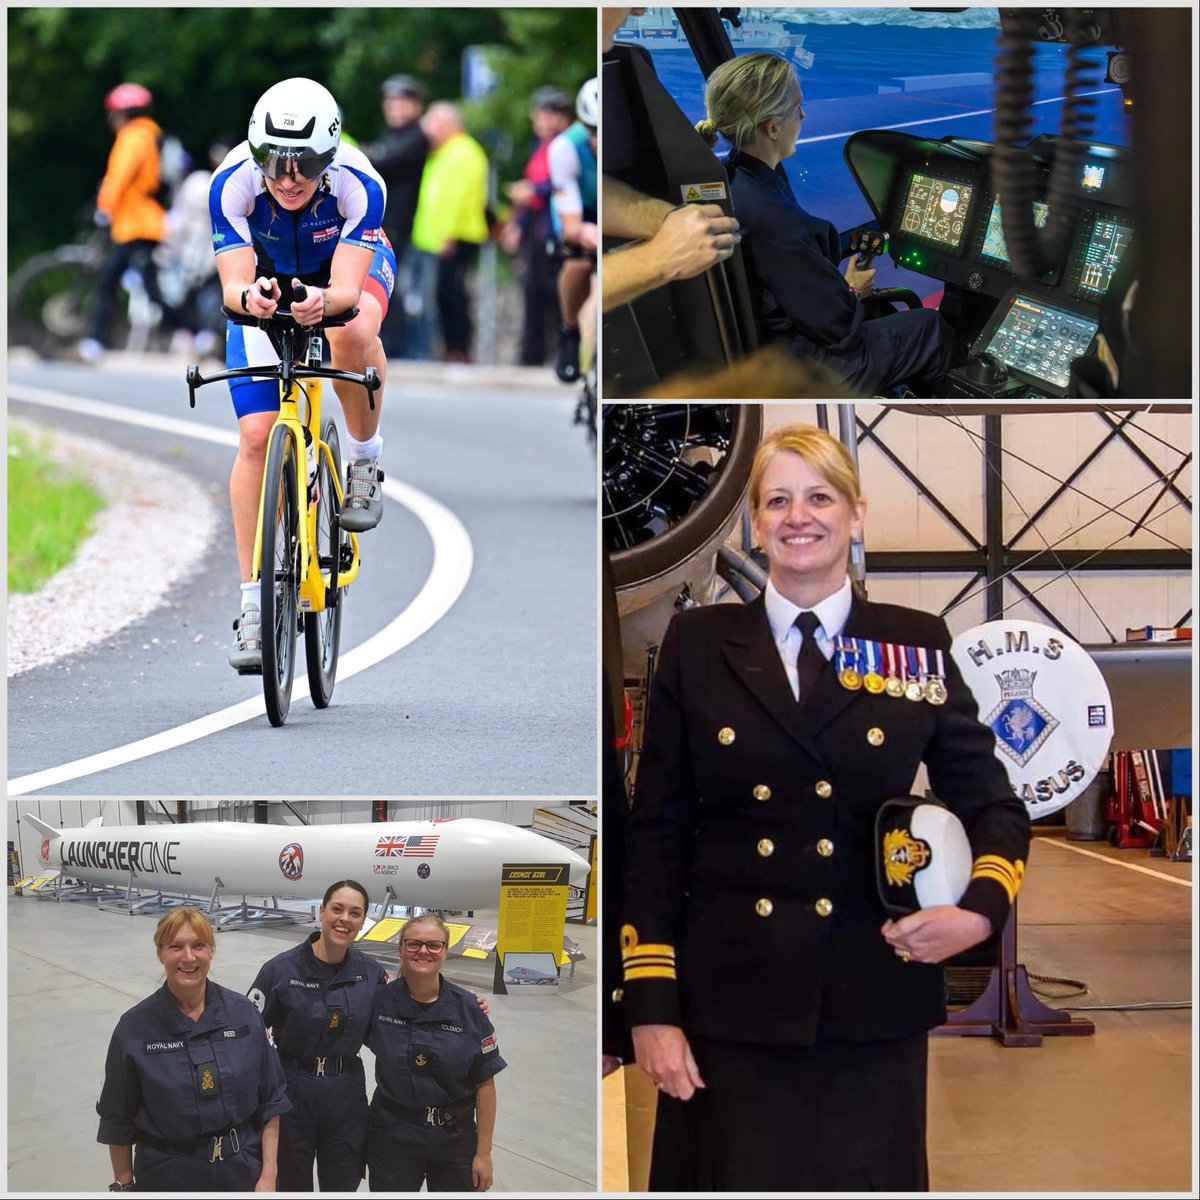 🌟 Happy #Internationalwomensday from HMS Pegasus! 💪🚢 We celebrate women's global achievements and honor their invaluable role in our unit and armed forces. Their courage and leadership inspire us daily. #RoyalNavalReserve